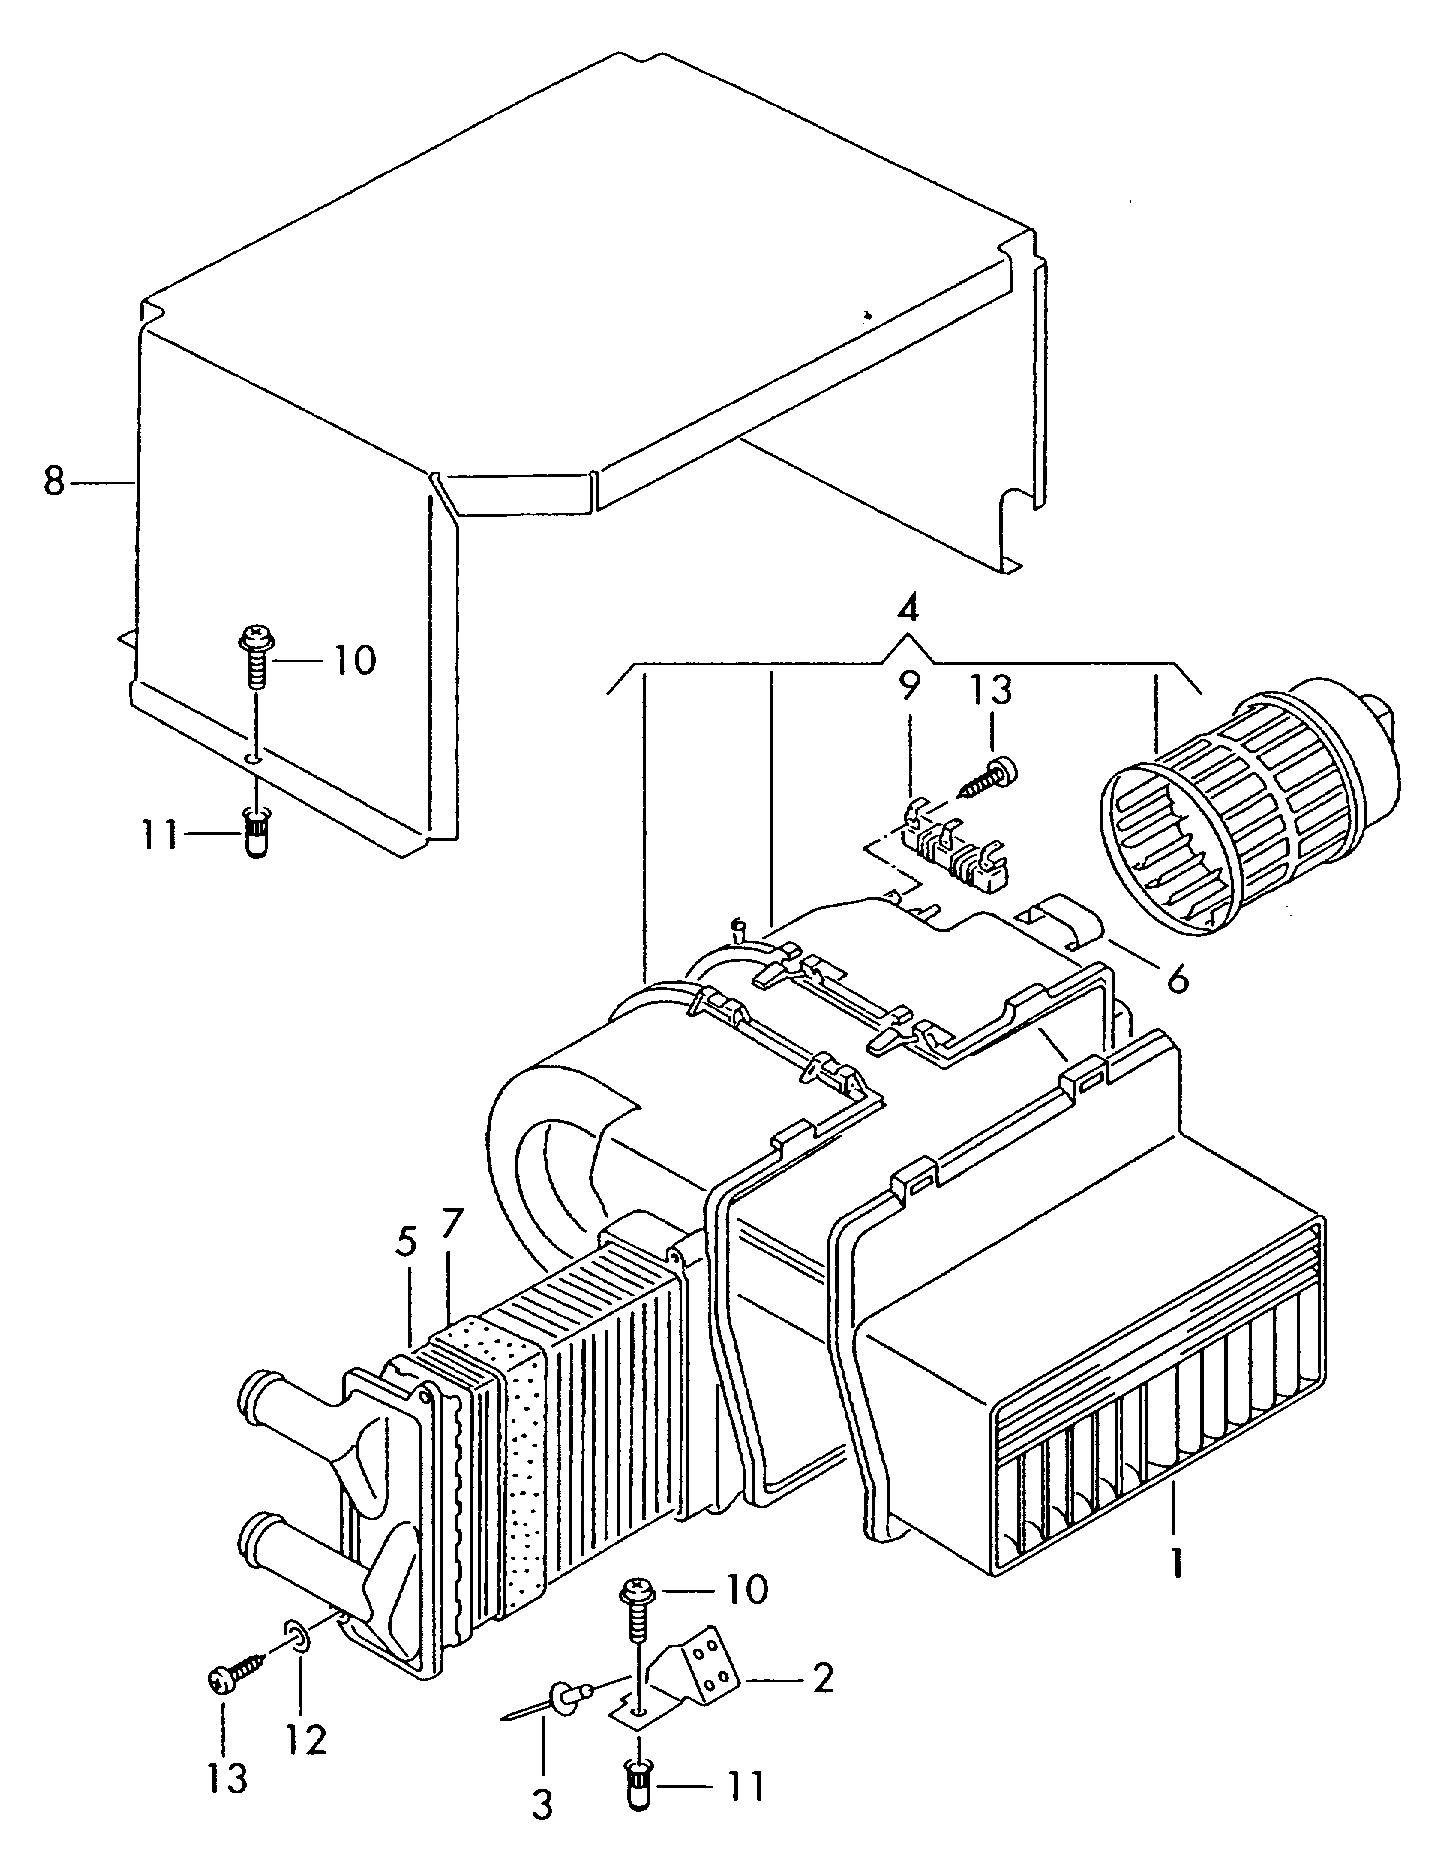 additional heater in passenger
compartment - Transporter(TR)  